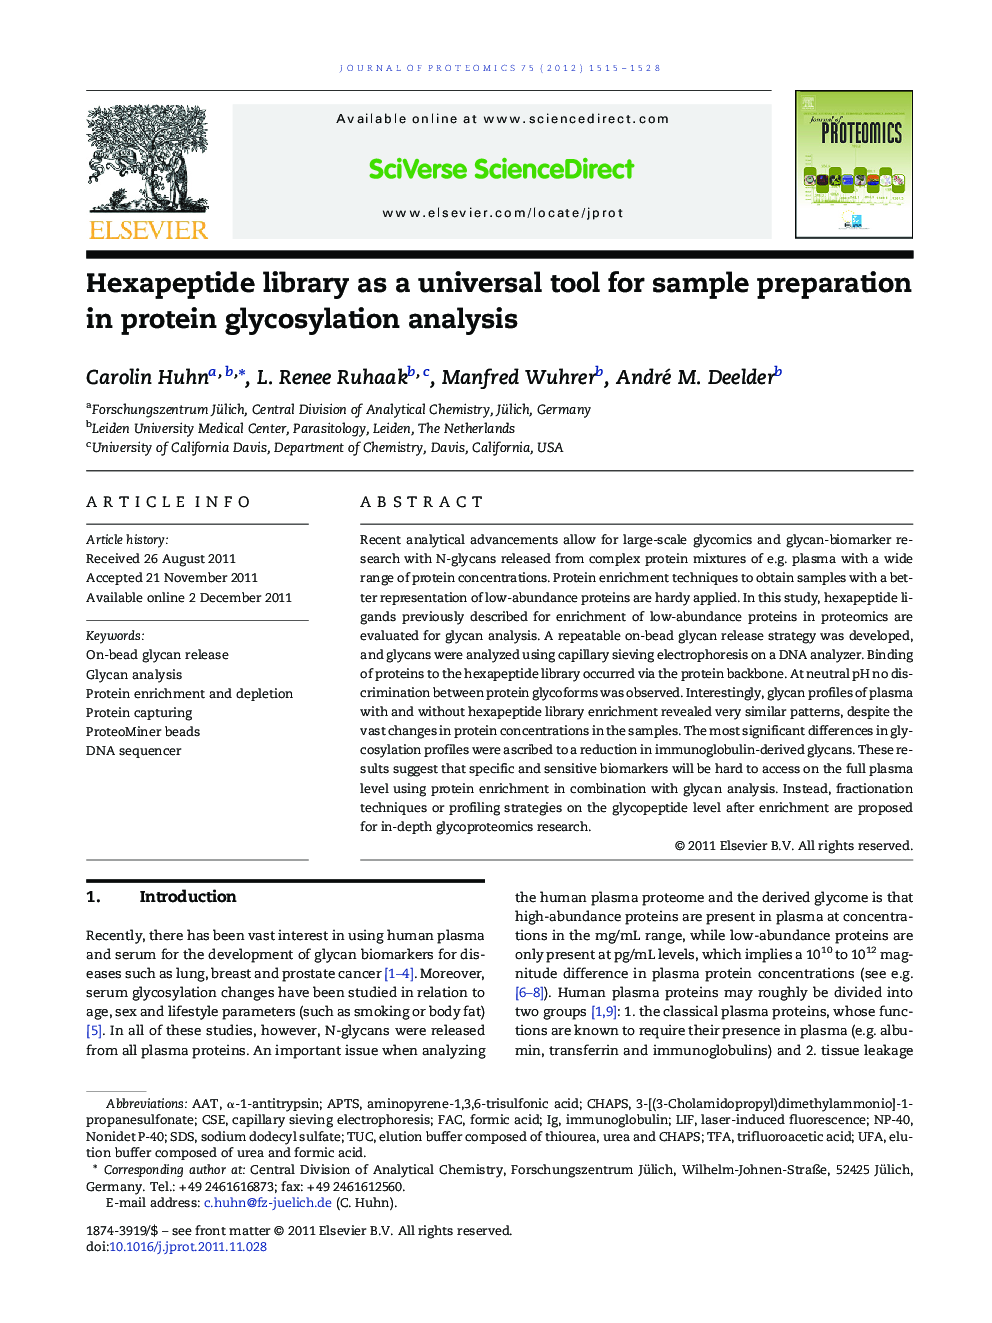 Hexapeptide library as a universal tool for sample preparation in protein glycosylation analysis